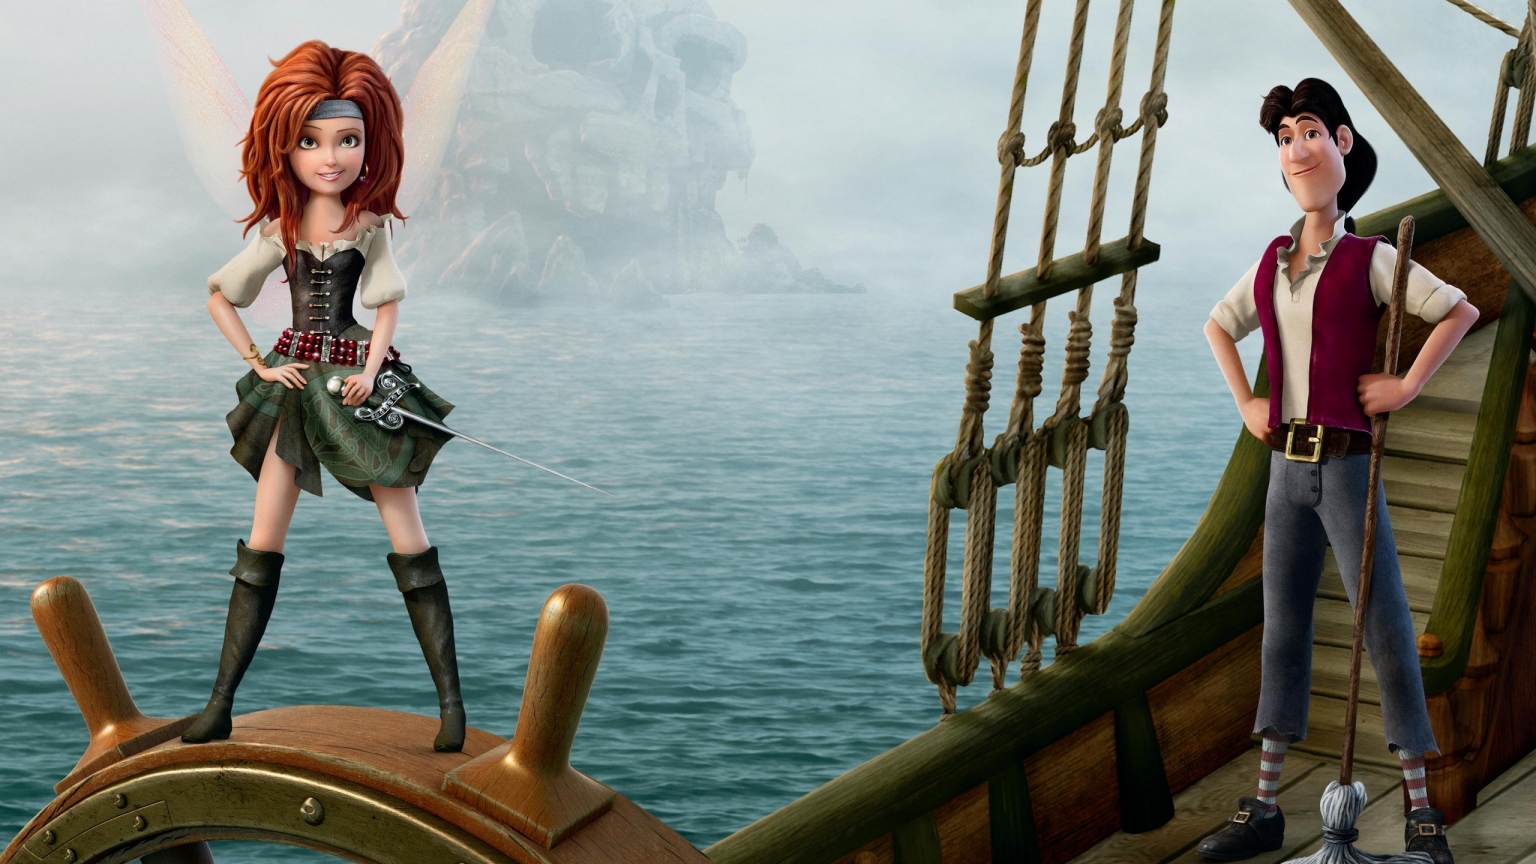 The Pirate Fairy for 1536 x 864 HDTV resolution